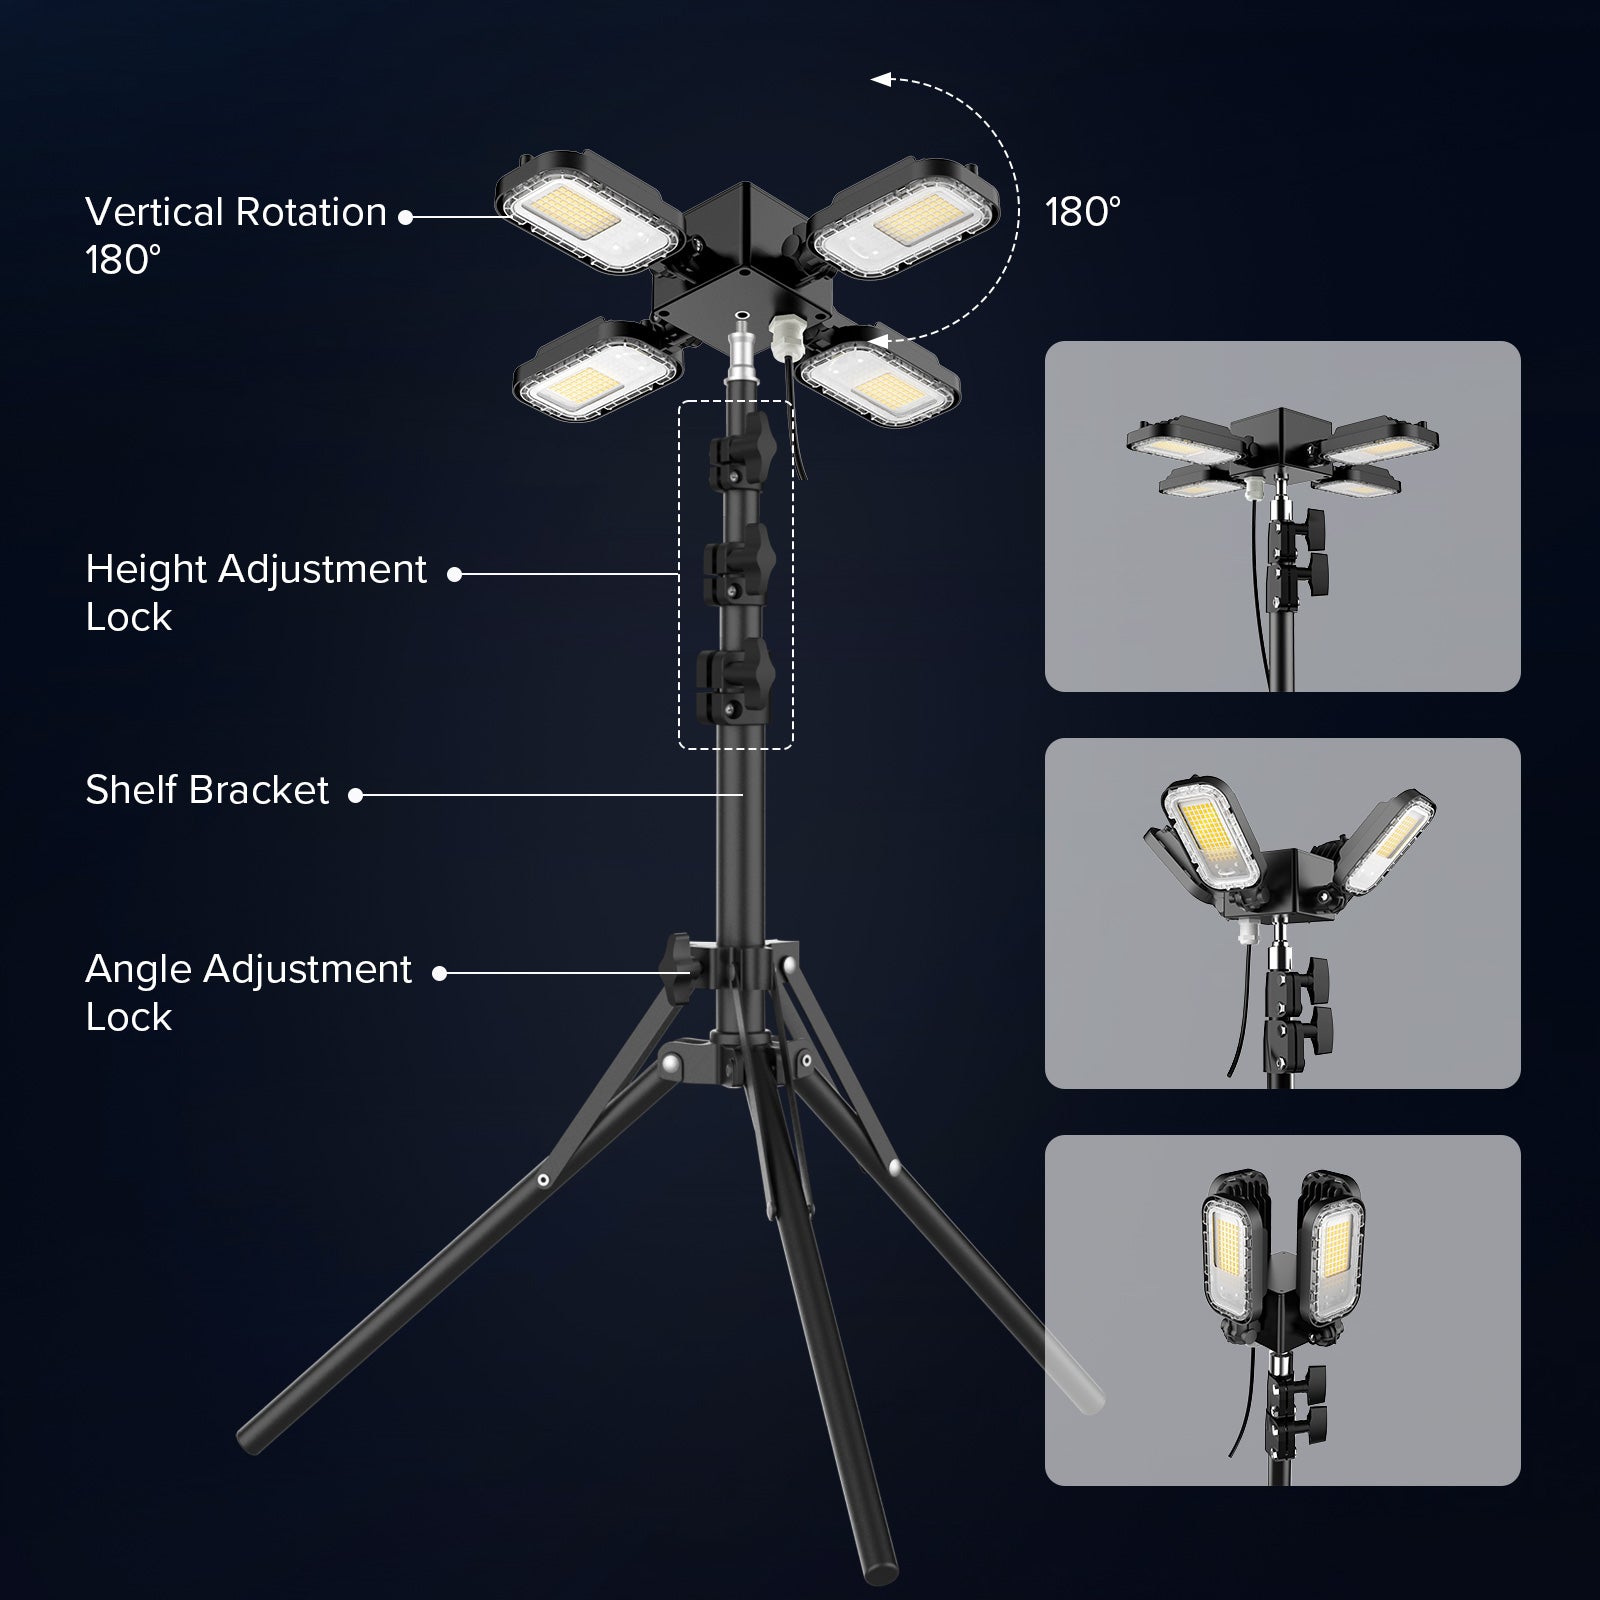 100W Adjustable 4-Head Work Light with Stand with vertical rotation 180°